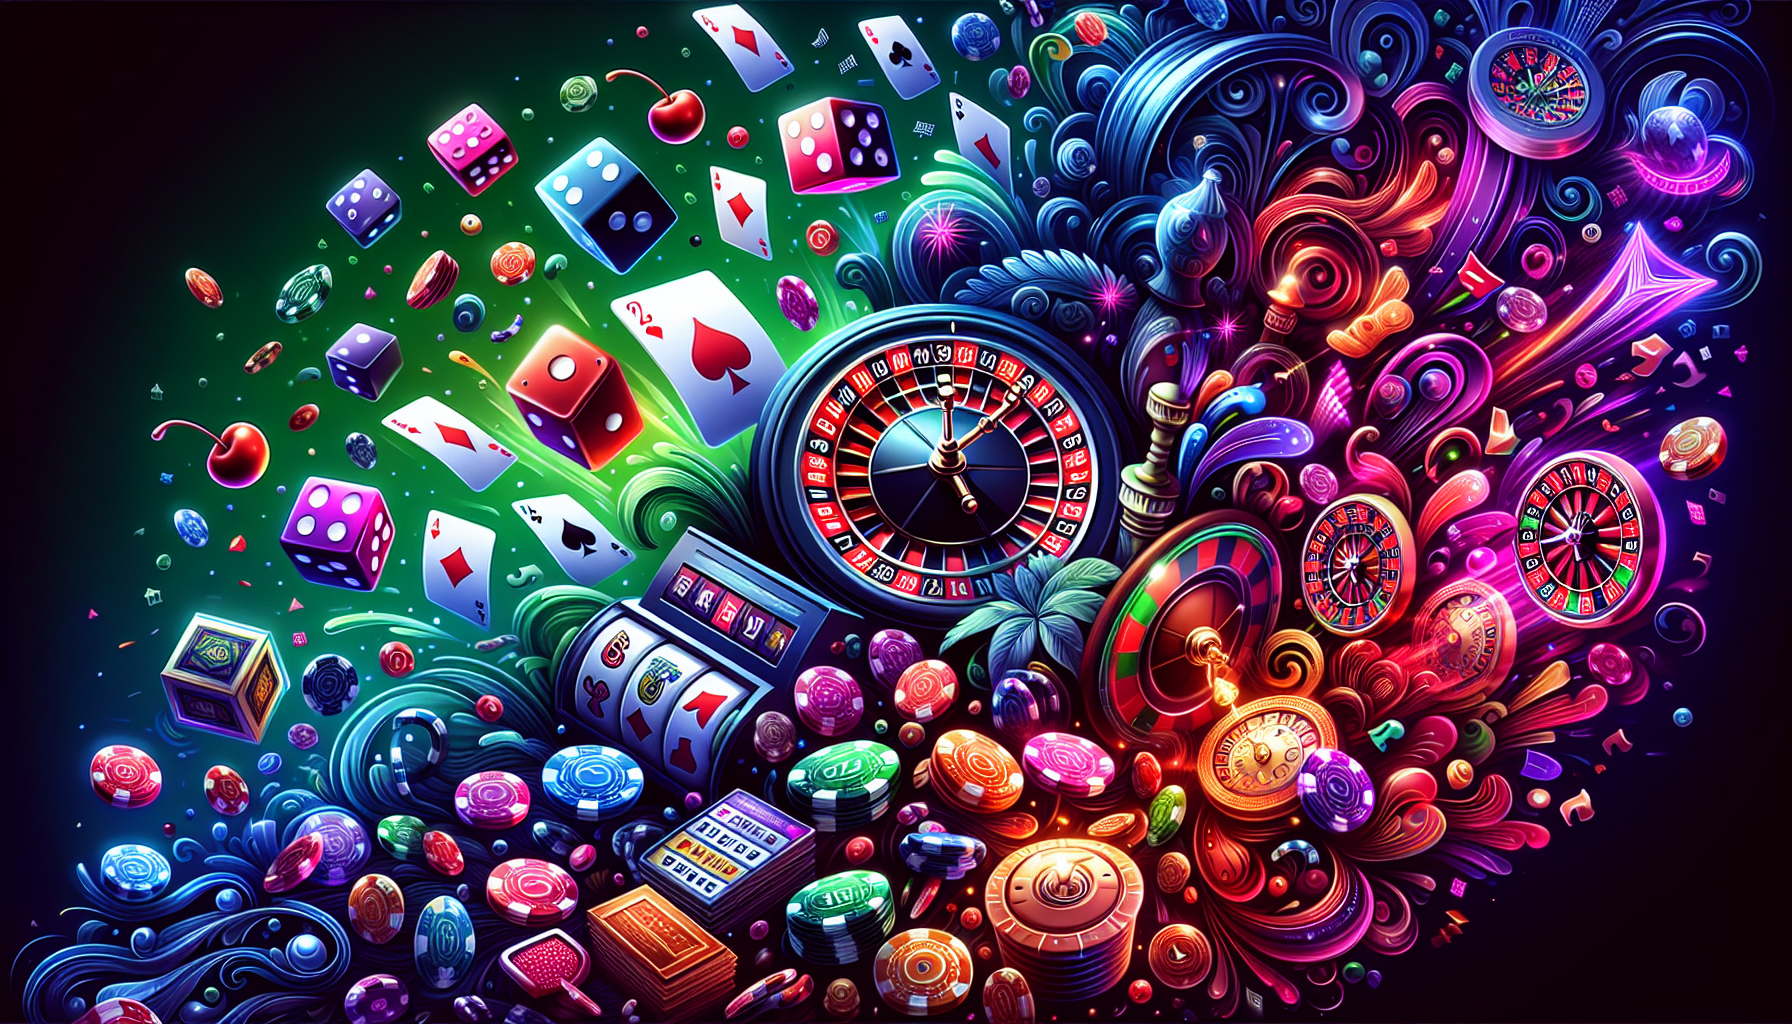 Casino Games Have Become Much More Interactive Since The Mobile Casino Age